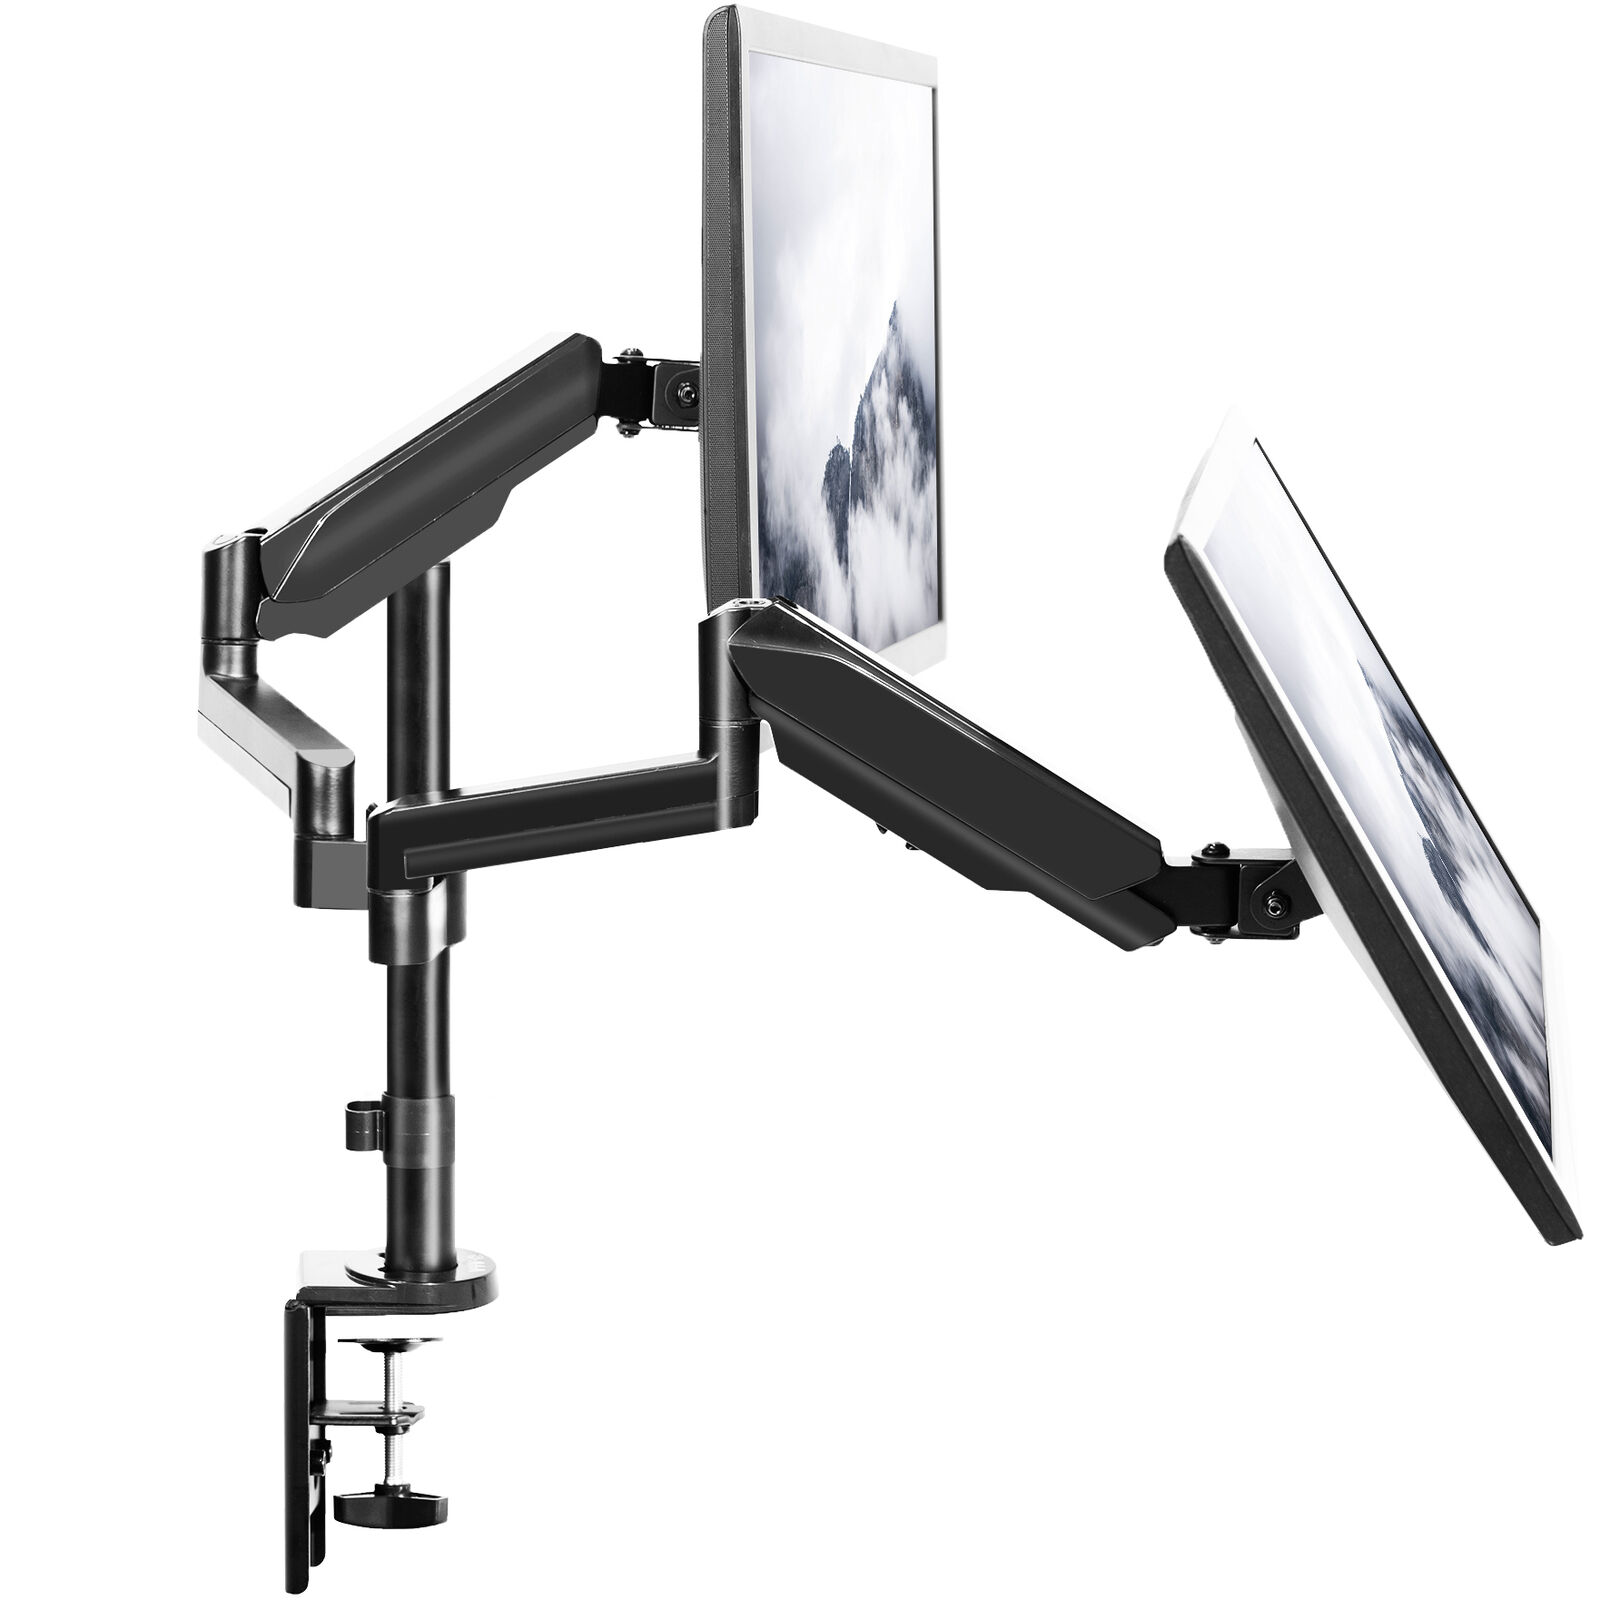 VIVO Dual Monitor Pneumatic Spring Sit-Stand Desk Mount for 2 Screens up to 32